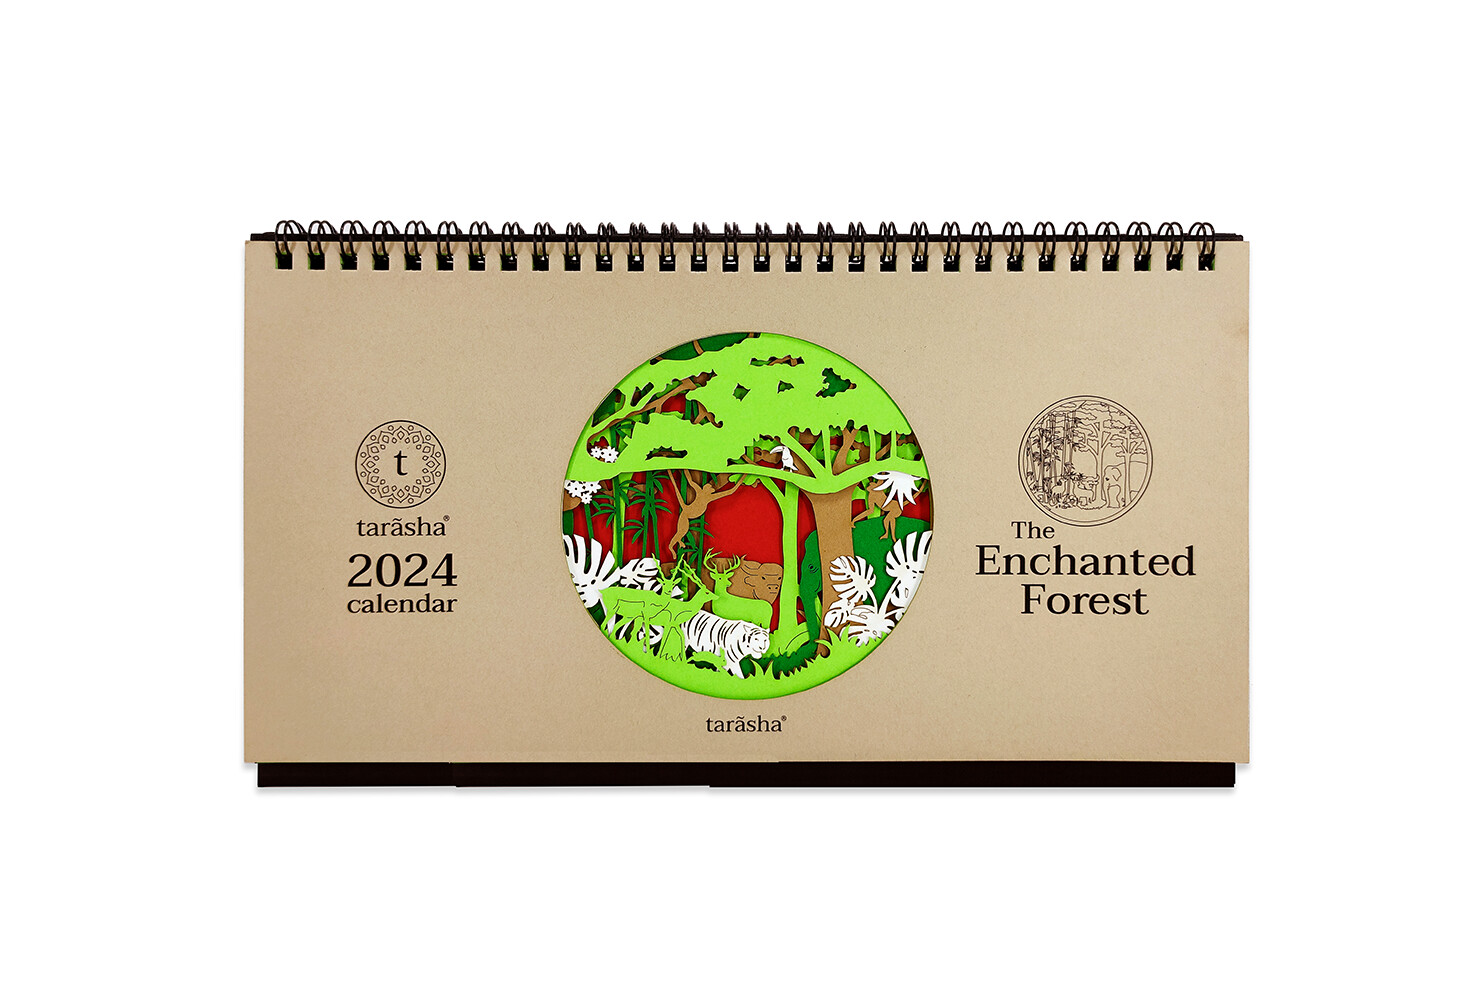 'The Enchanted Forest' Calendar 2024